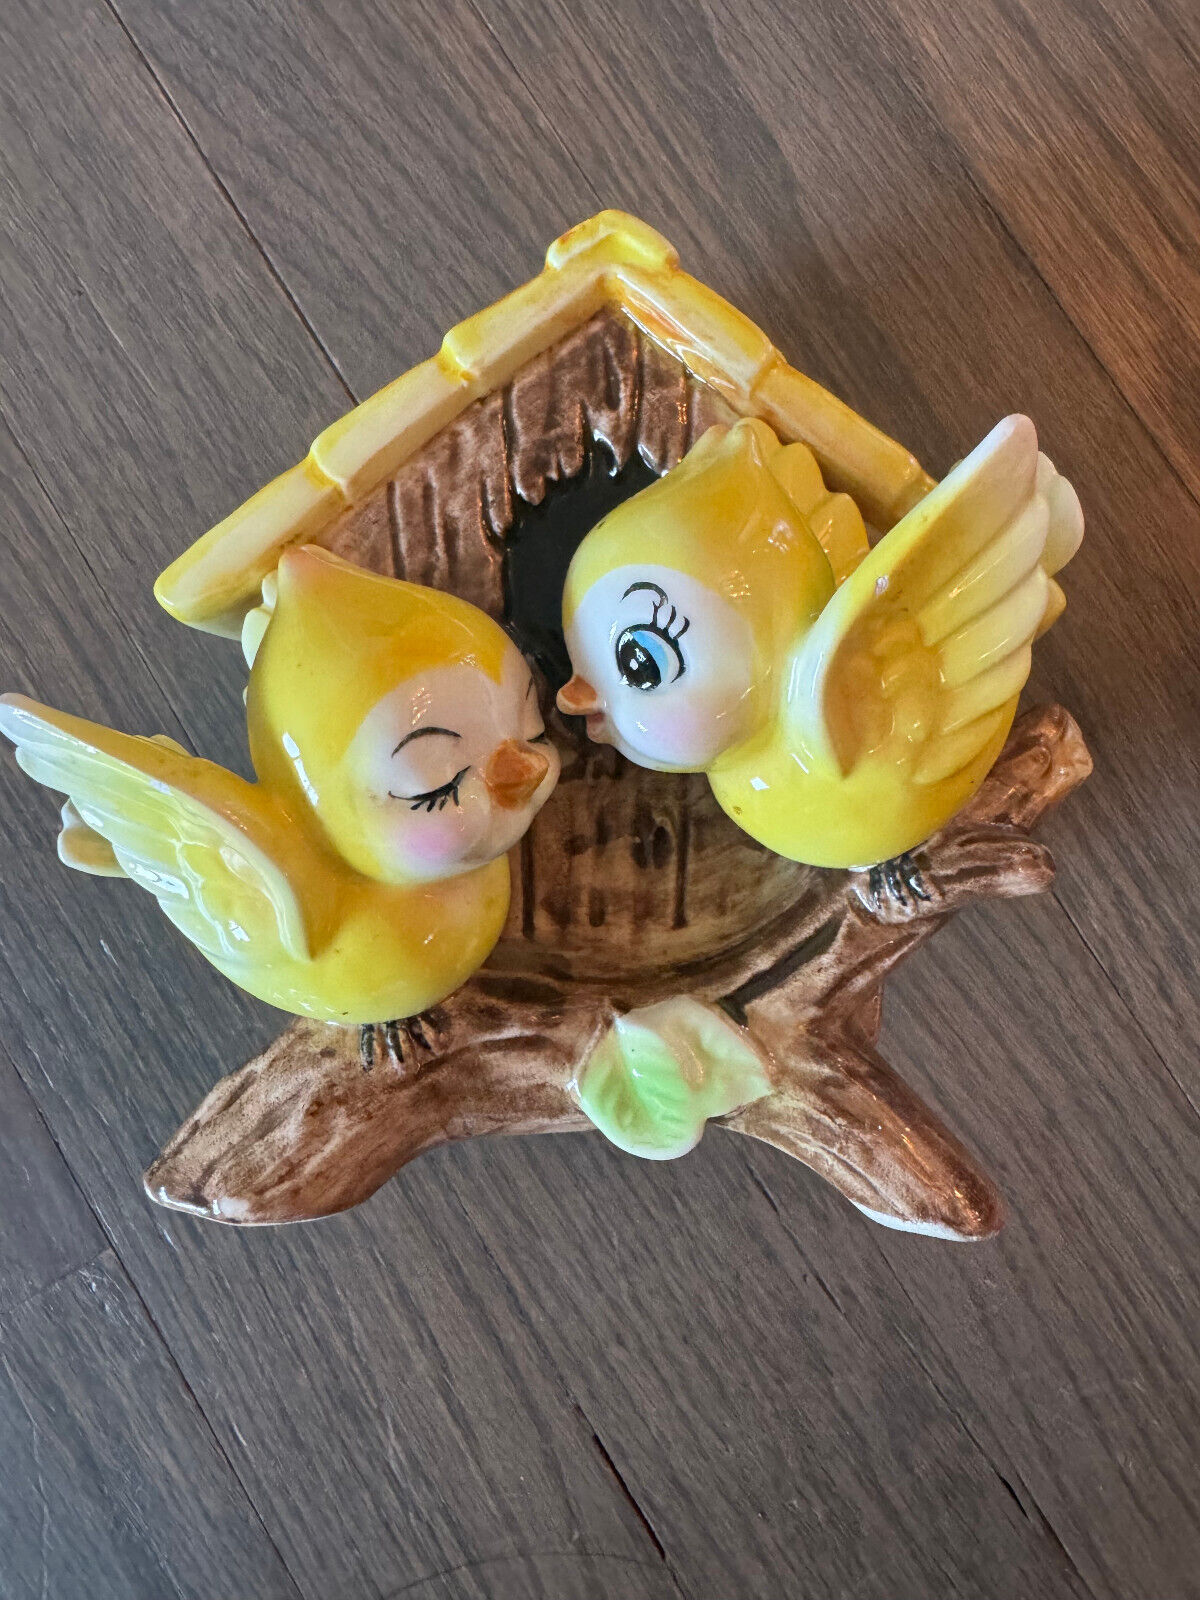 VINTAGE NORCREST YELLOW BIRDS ON A BIRDHOUSE PIGGY BANK WITH STOPPER EXC COND